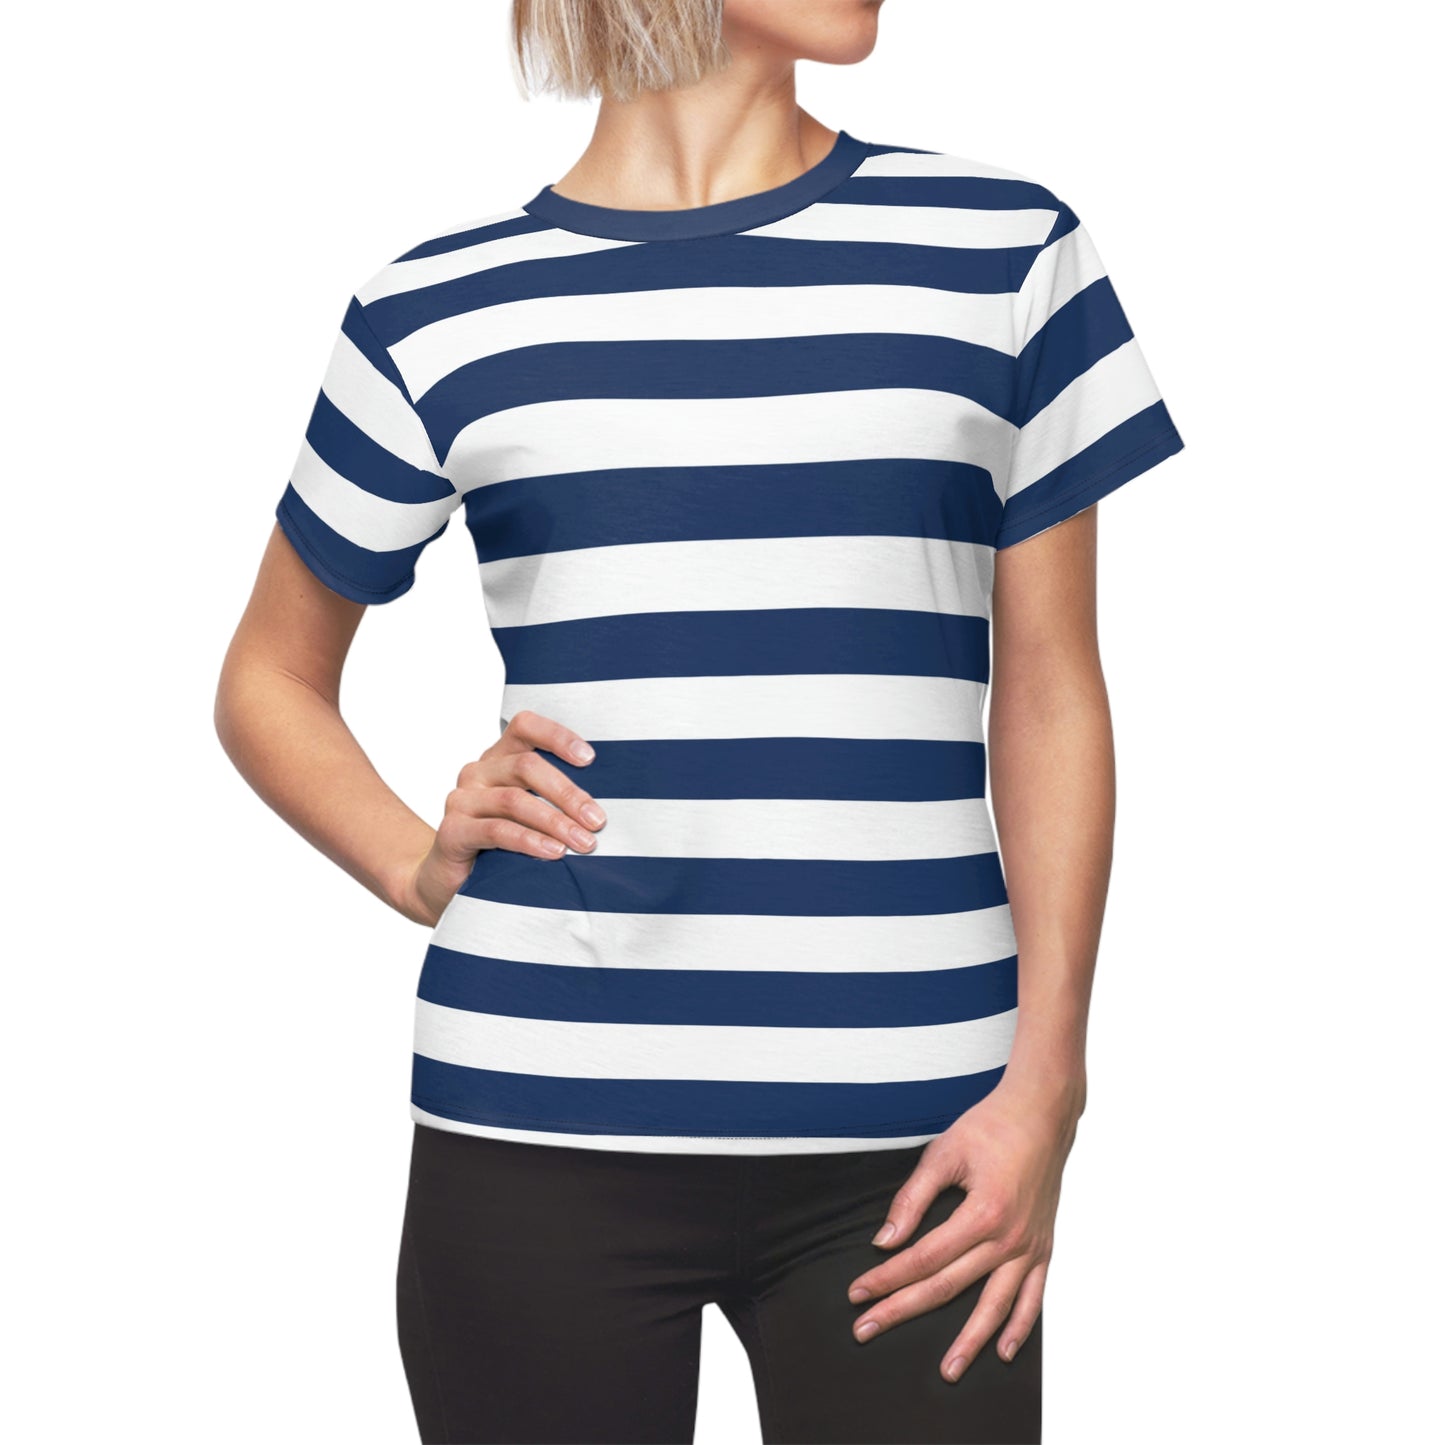 Blue and White Striped Women Tshirt, Vintage Designer Adult Graphic Aesthetic Fashion Fitted Crewneck Ladies Tee Shirt Top